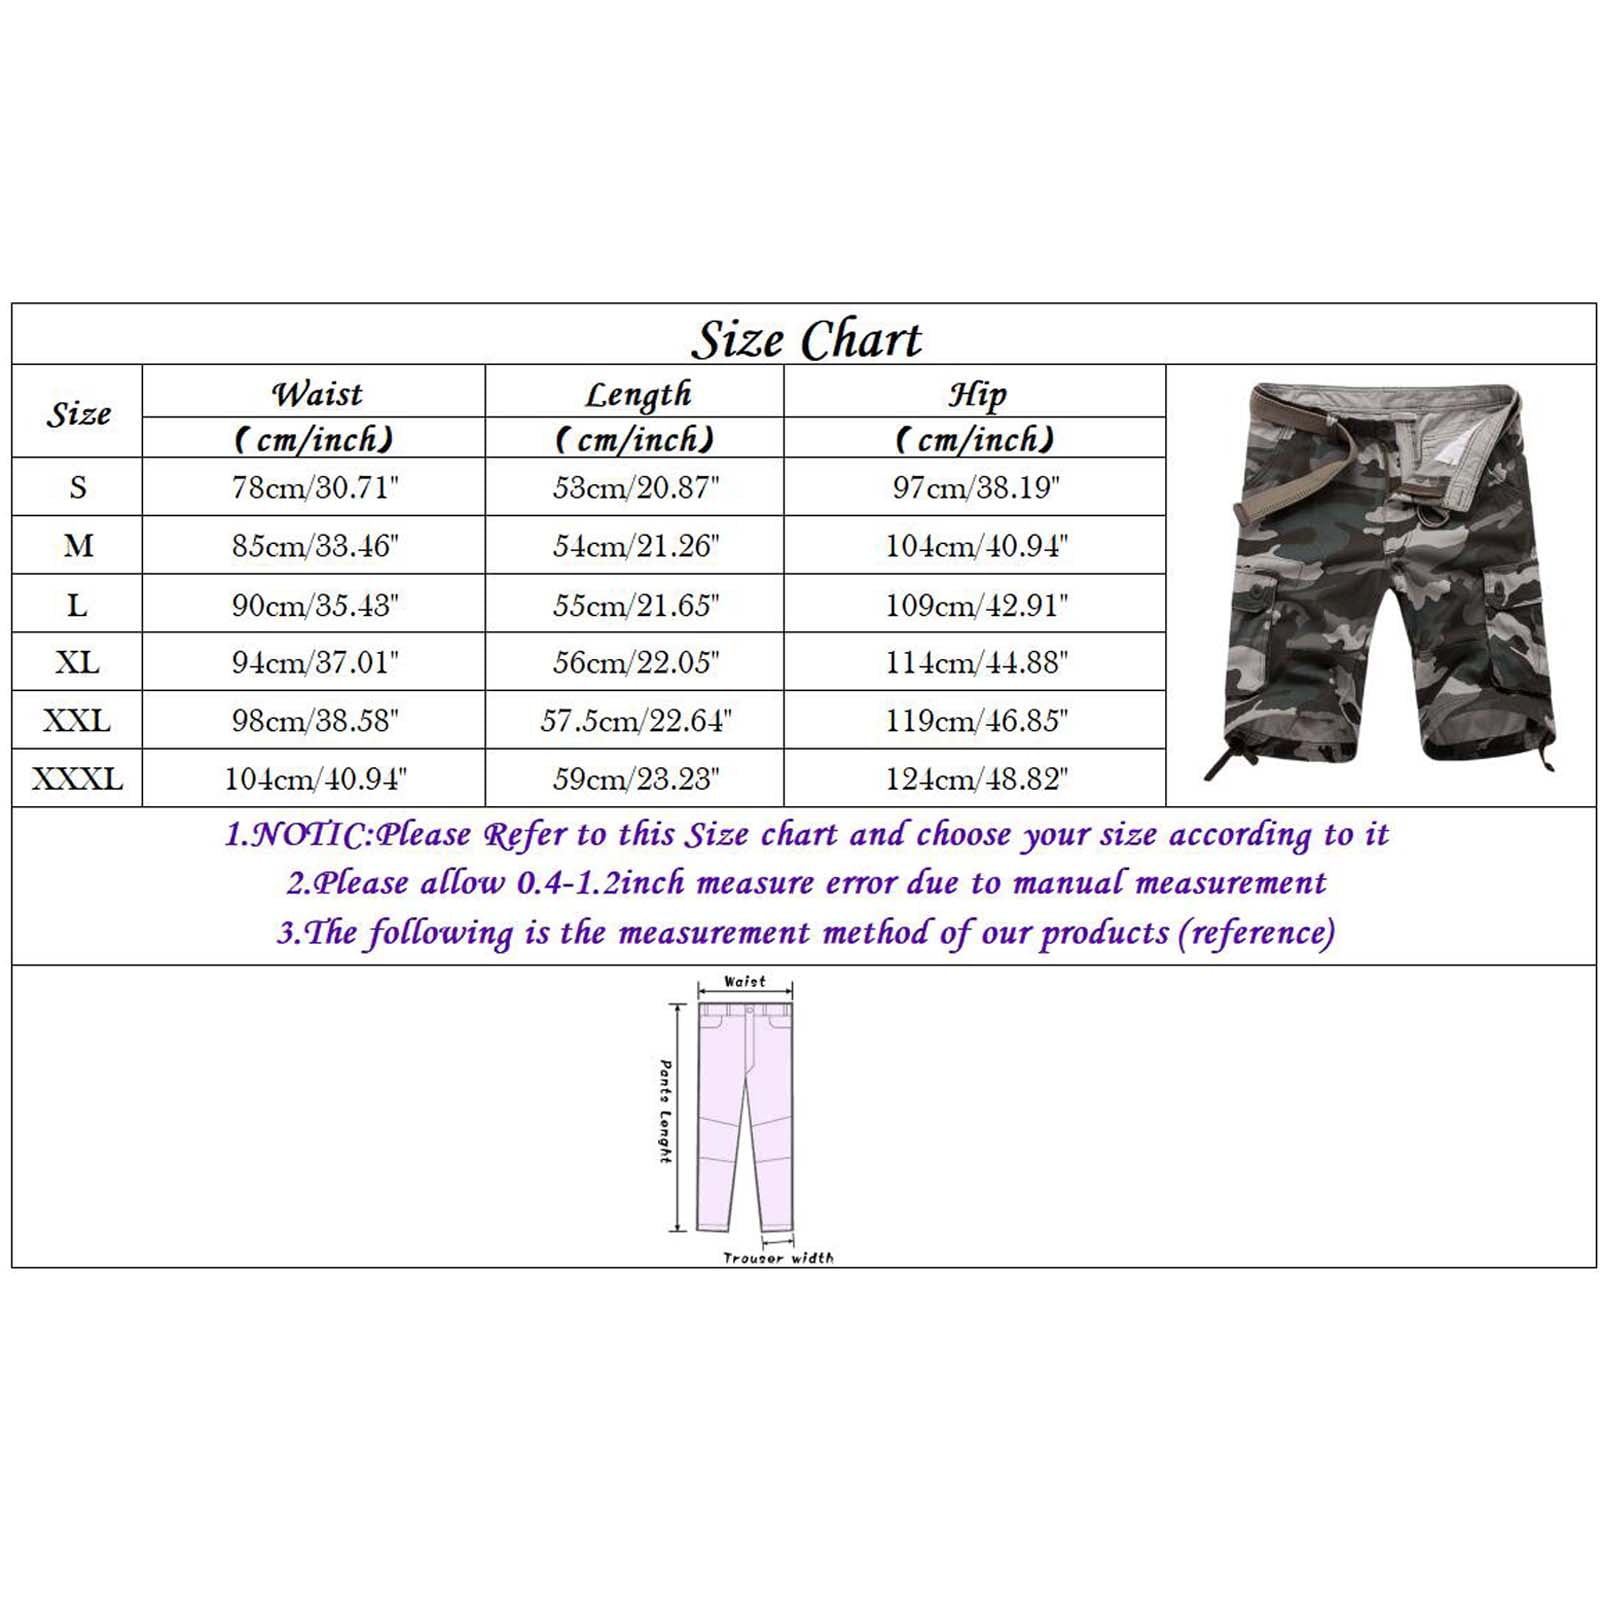 Male to female clothing size conversion chart, Dress sizes. Clothing size, Women's  sizes, Shoe size, Men's clothing size, Body measurements, Size conversion